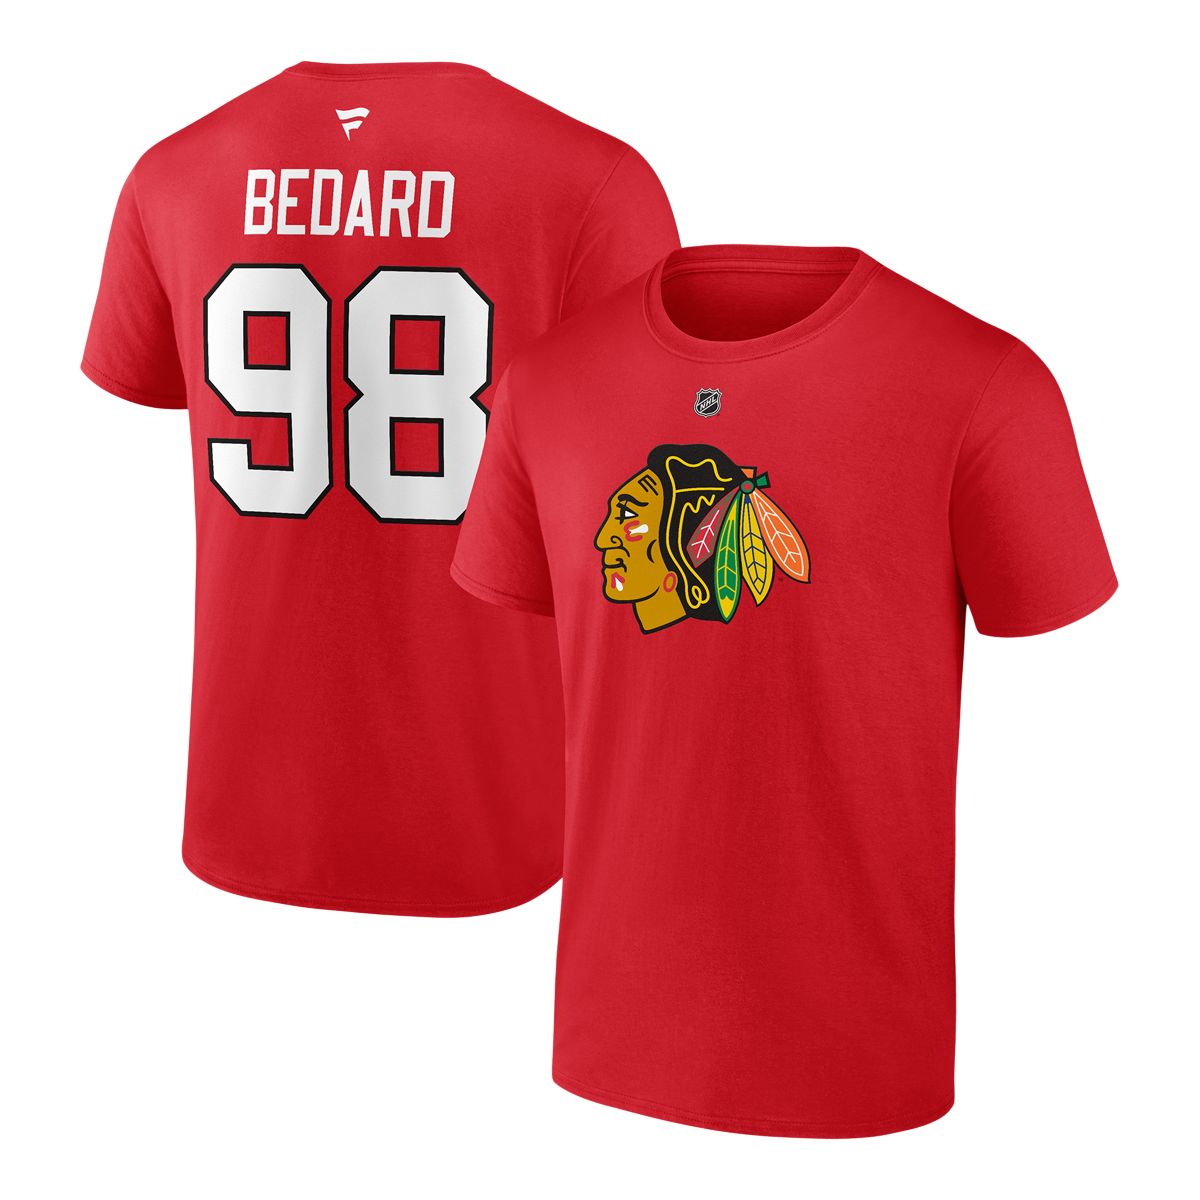 Connor Bedard jersey sales booming among Blackhawks fans, but